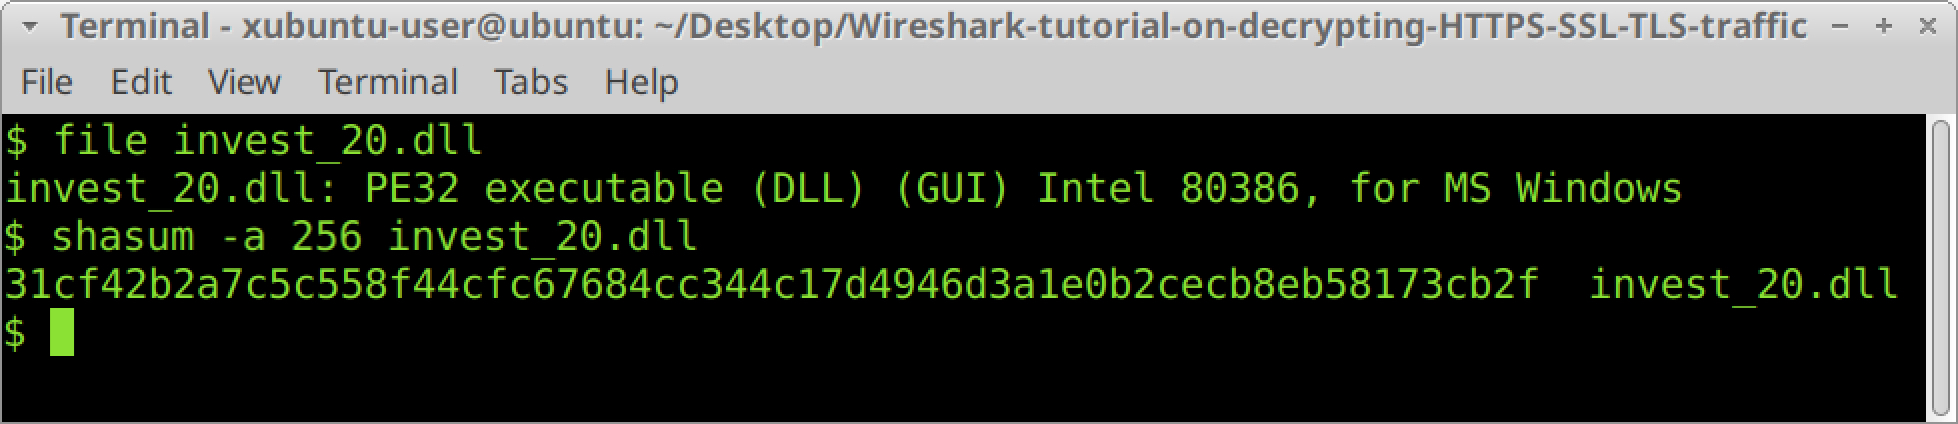 The screenshot from the decrypting HTTPS traffic tutorial shows how you can open a terminal window in a BSD, Linux or macOS environment, use the file command to confirm this is a DLL file, and then get the SHA256 hash of the file. 